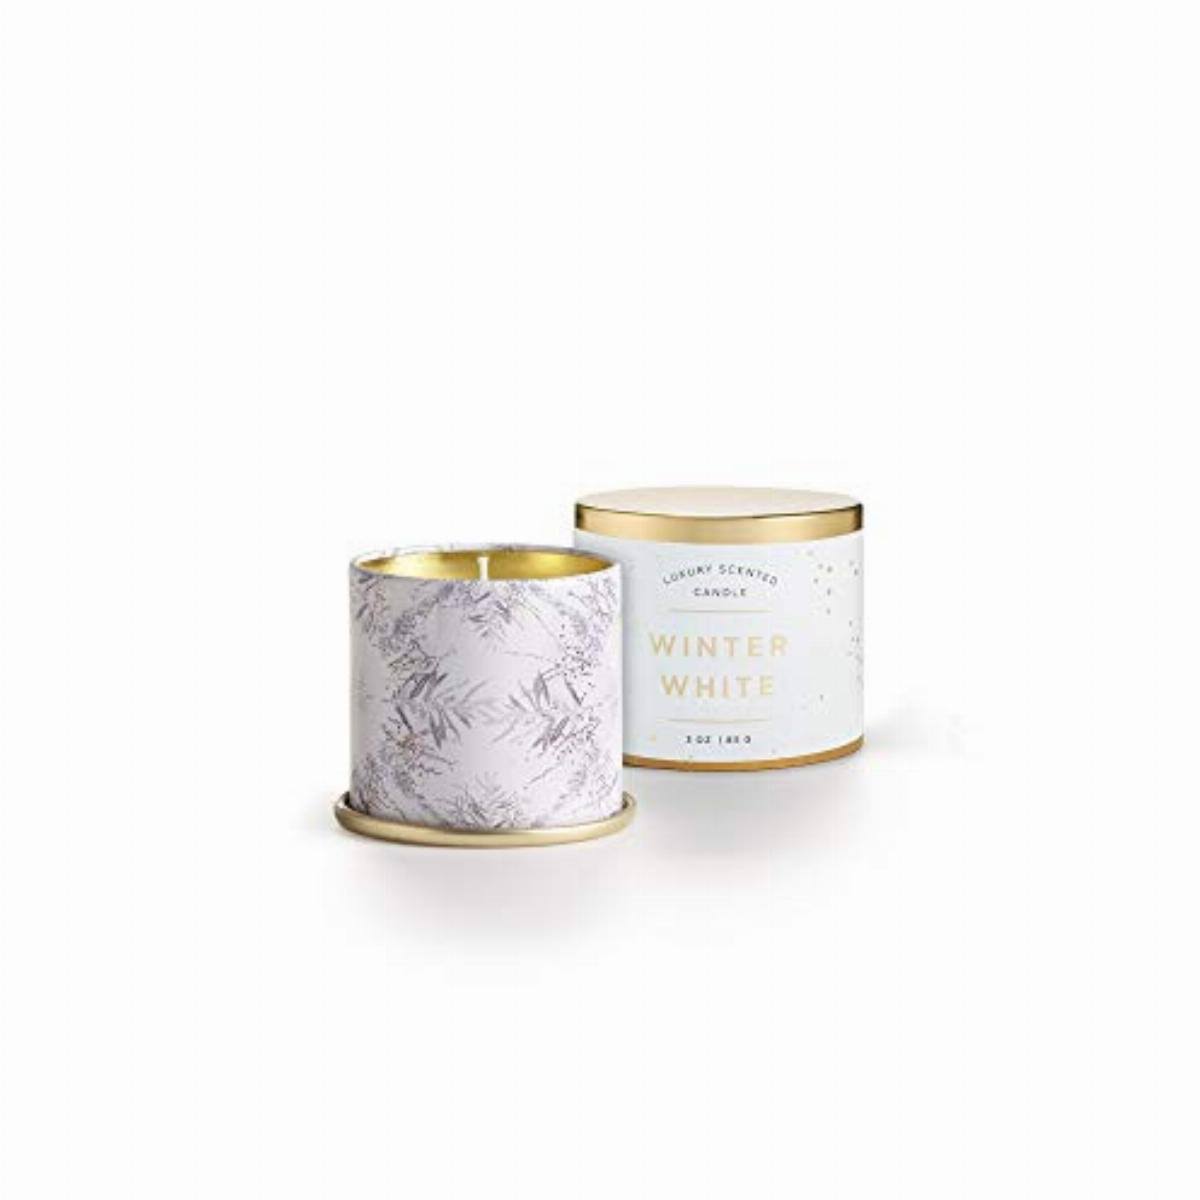 Luxury Scented Candle - Winter White, 3oz